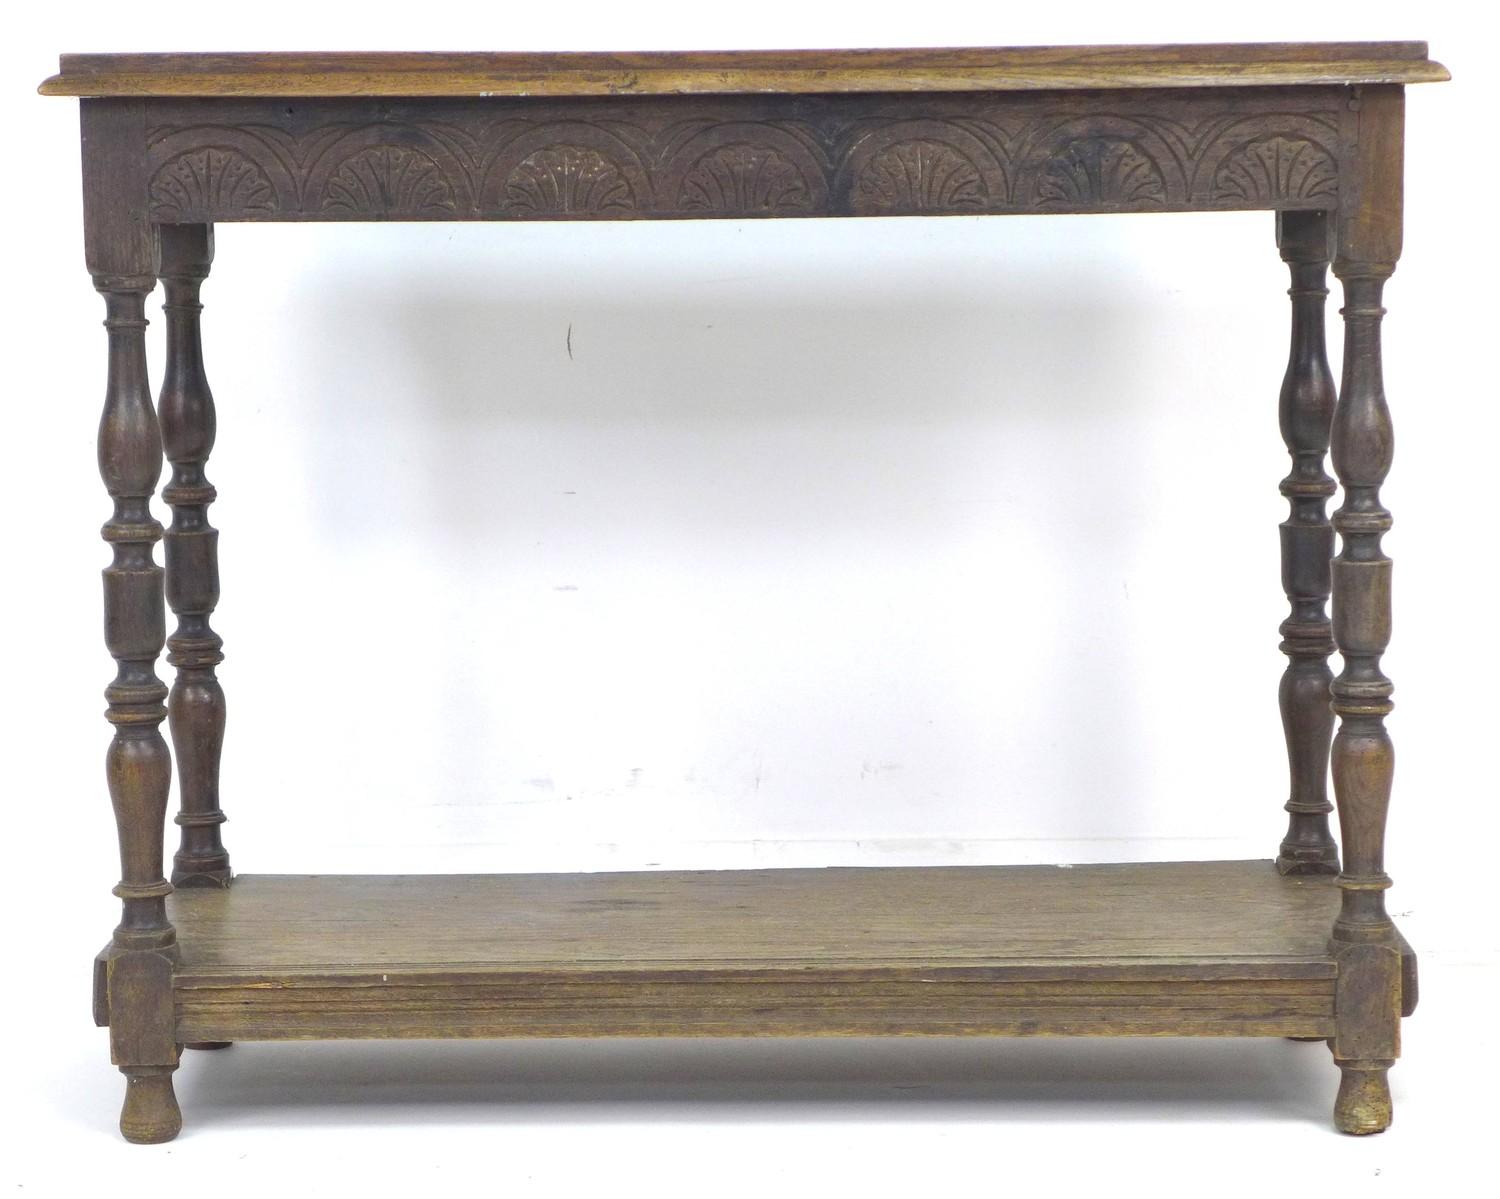 An 18th century style oak side table, with carved freeze decorated with shells, turned legs and - Image 2 of 4